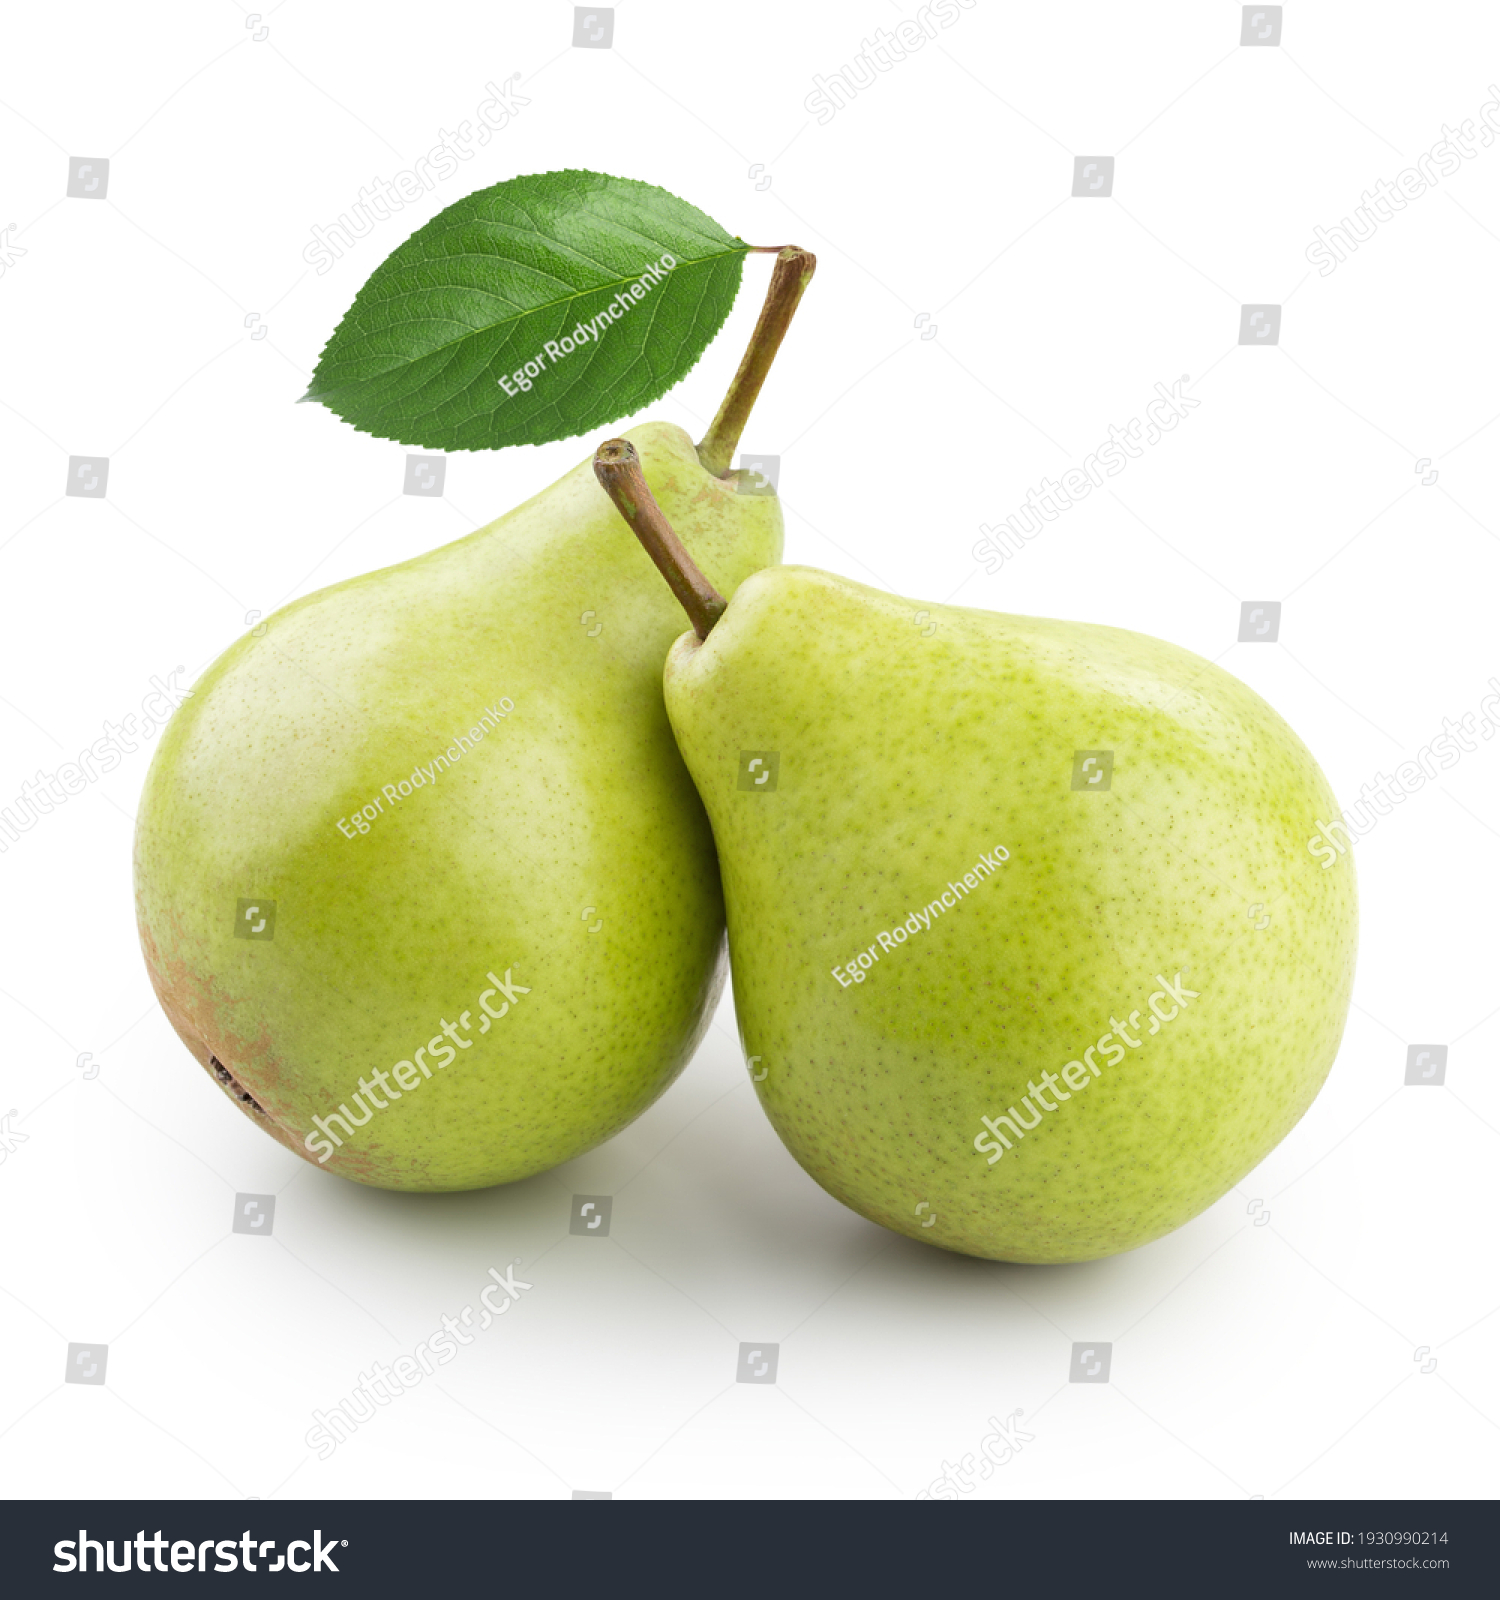 Two ripe pears with leaf isolated on white #1930990214